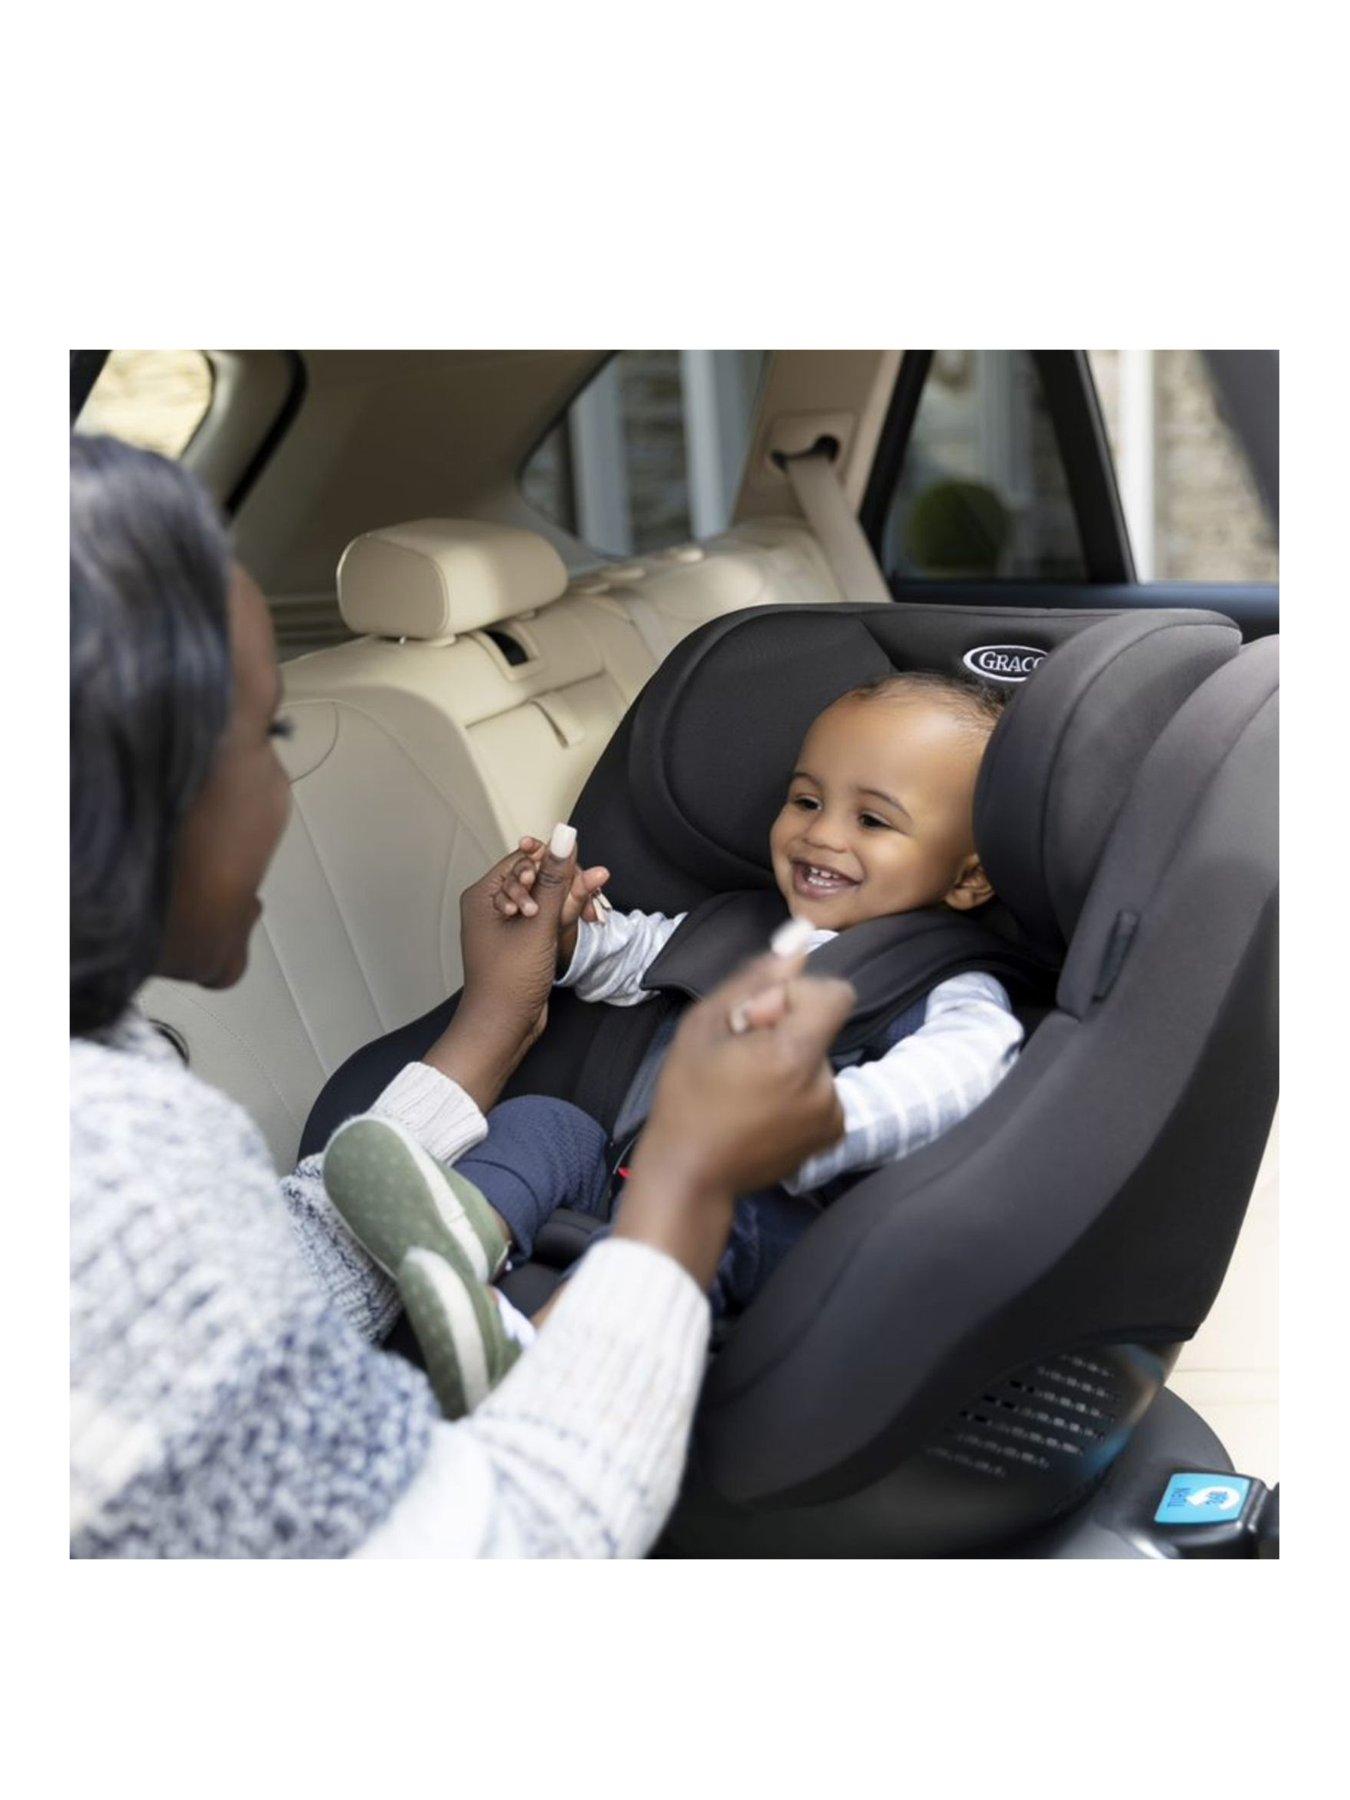 Mom Knows Best: Graco Turn2Me 3-in-1 Car Seat Review